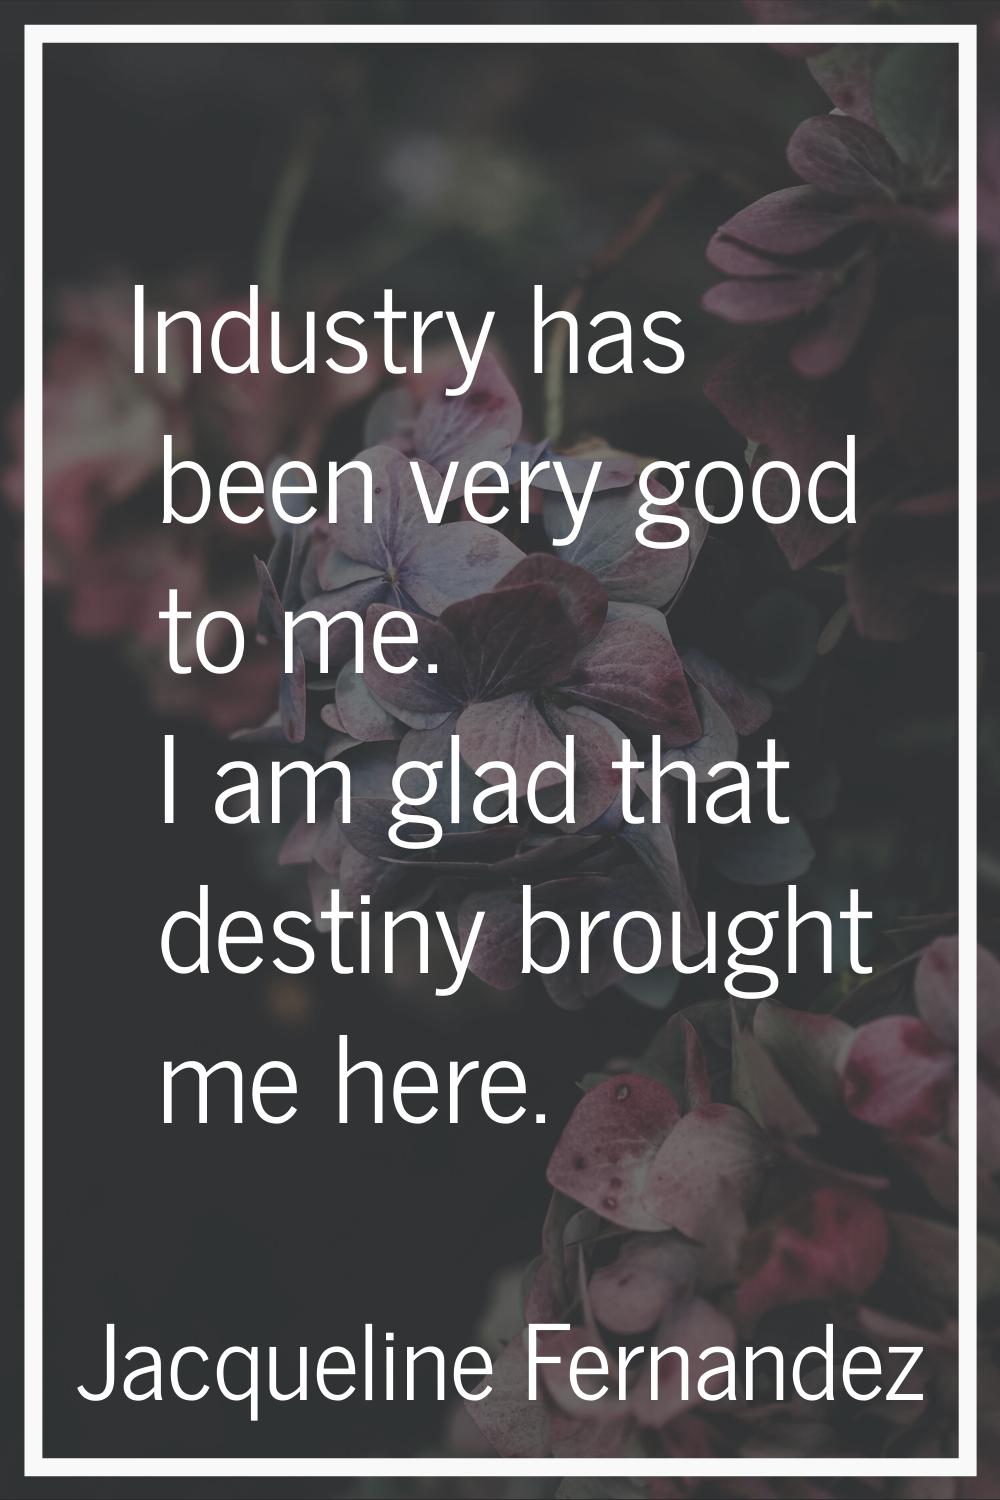 Industry has been very good to me. I am glad that destiny brought me here.